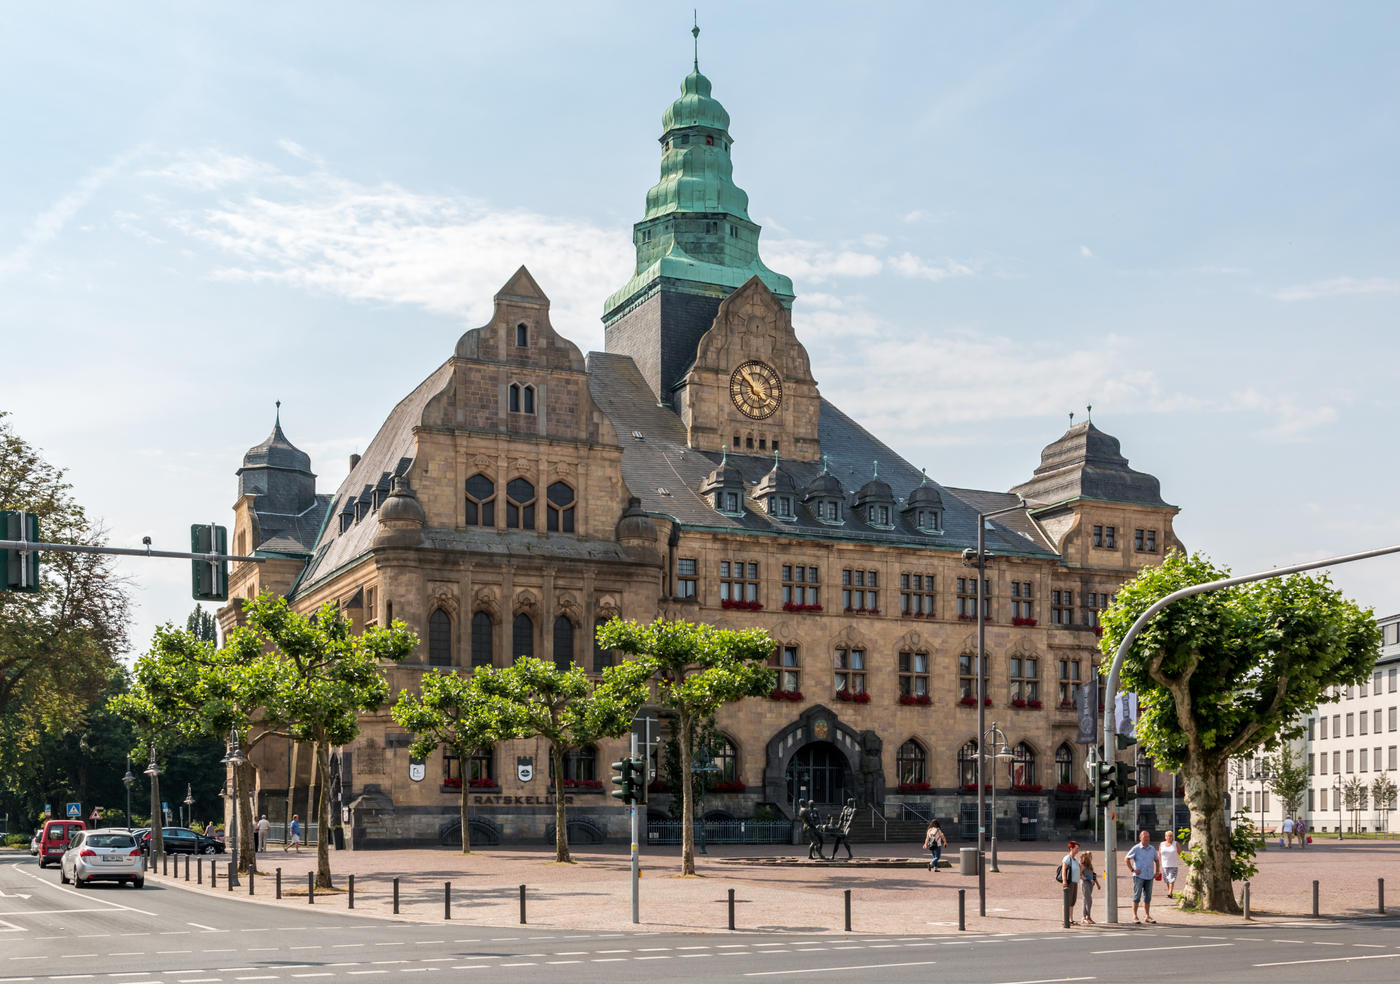 Recklinghausen: Cultural jewel in the Ruhr area